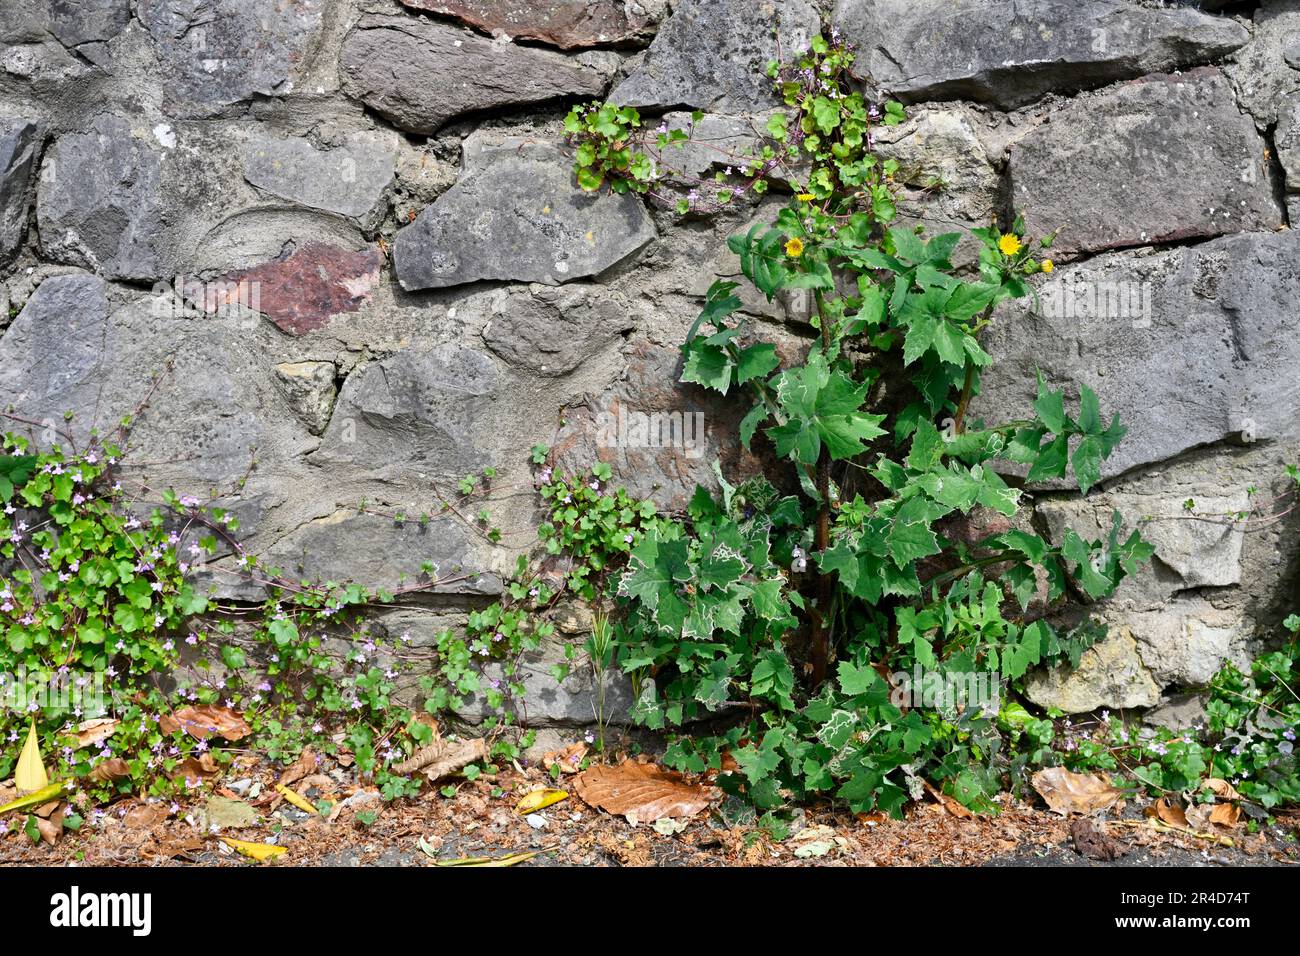 Weeds growing in cracks in stone wall and pavement Stock Photo